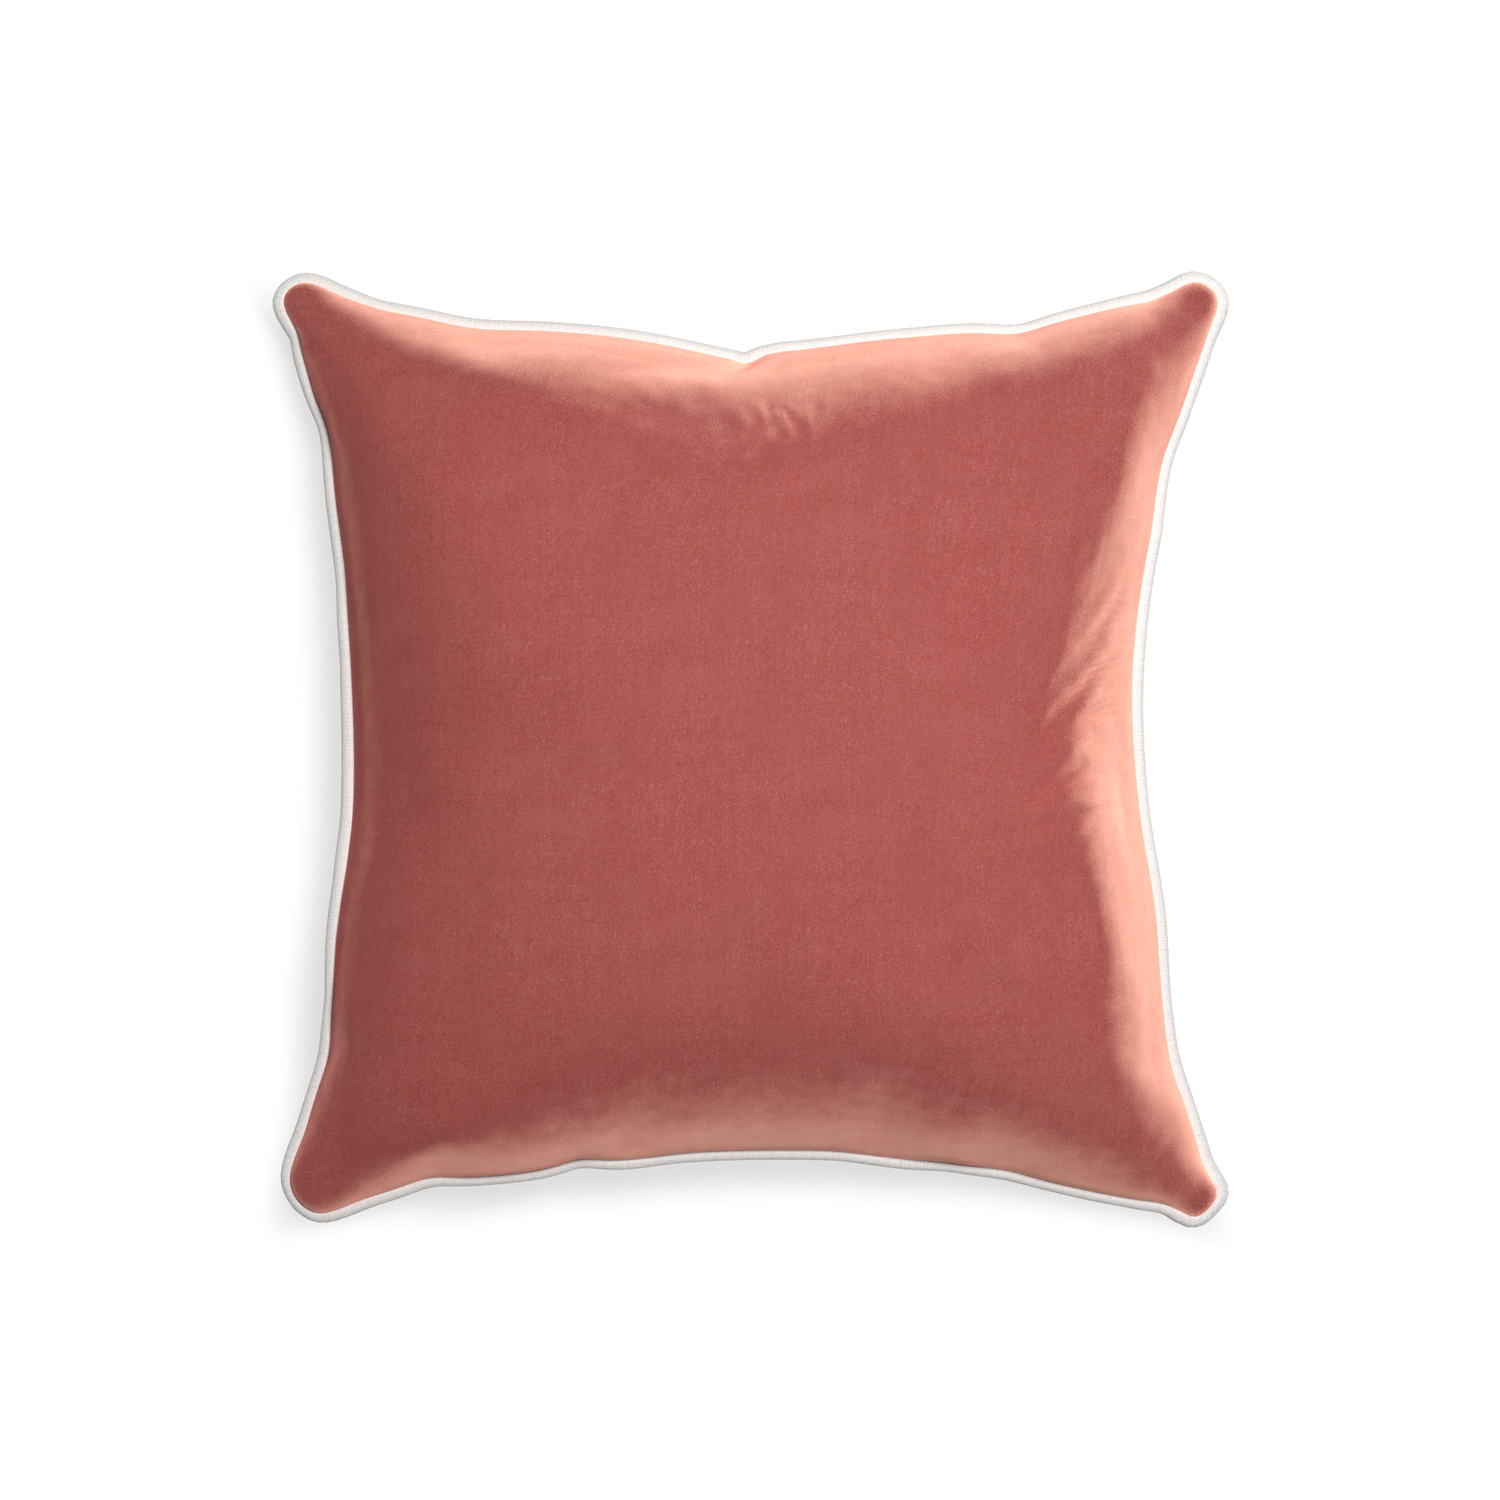 square coral velvet pillow with white piping